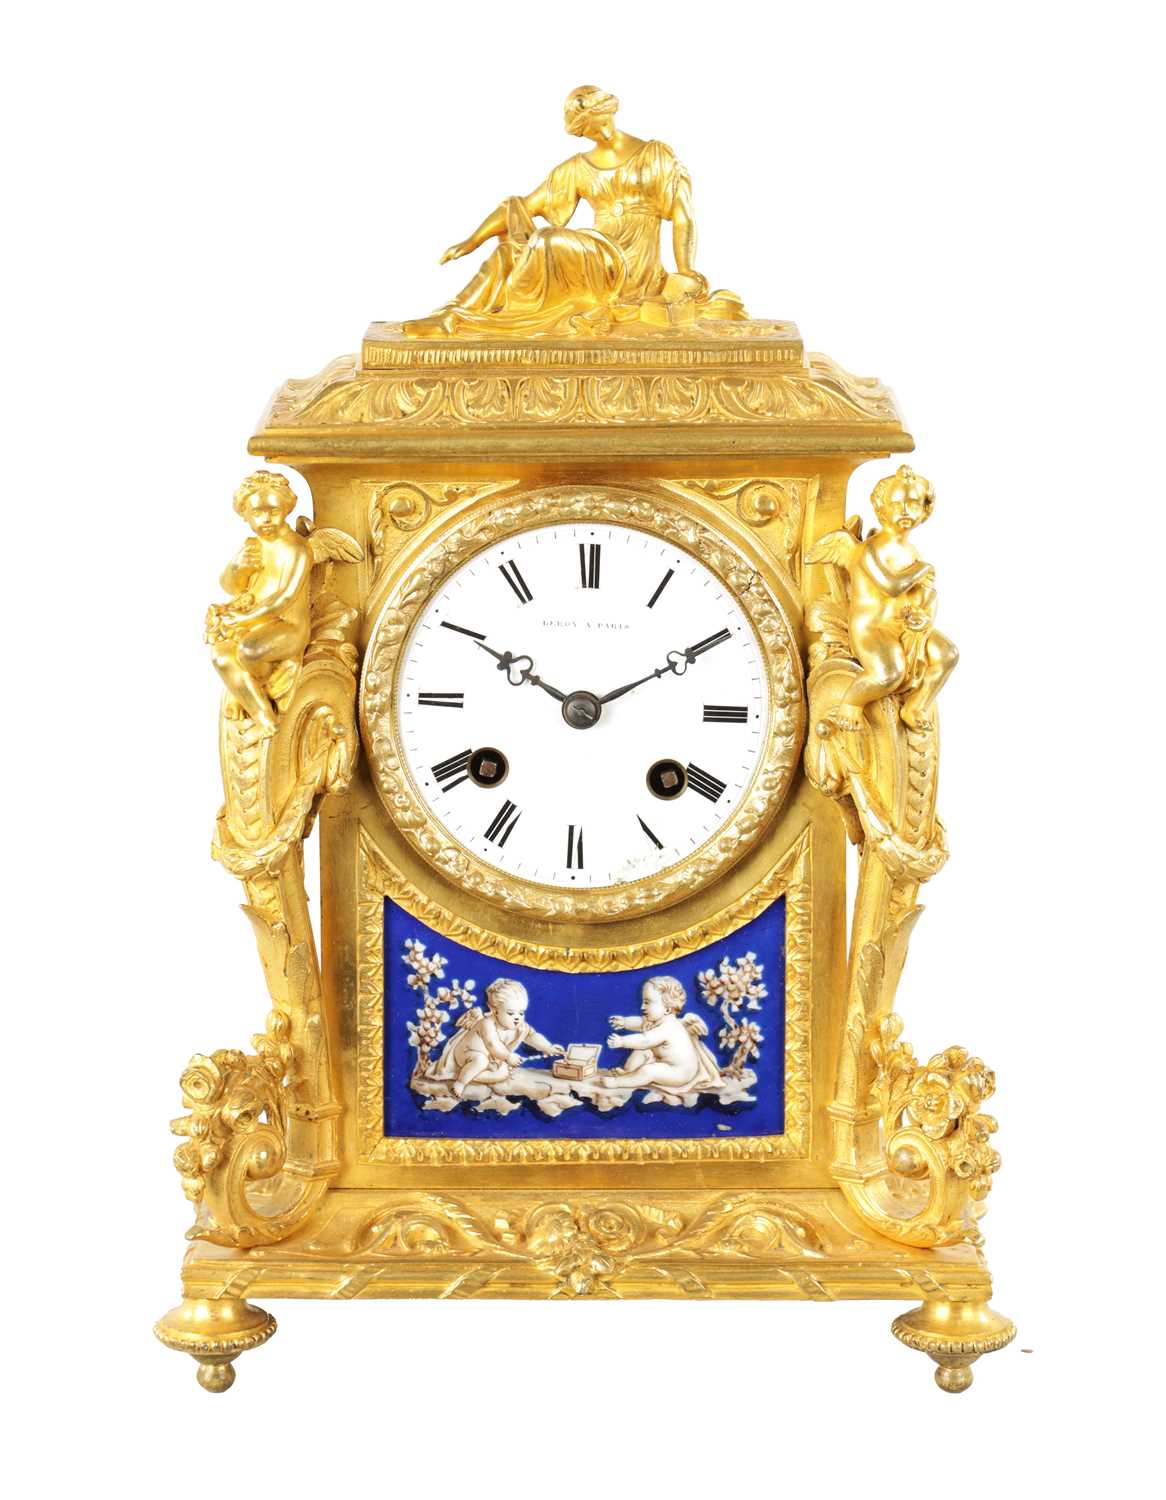 Lot 1213 - LEROY A PARIS. A 19TH CENTURY FRENCH ORMOLU AND PORCELAIN PANELLED MANTEL CLOCK